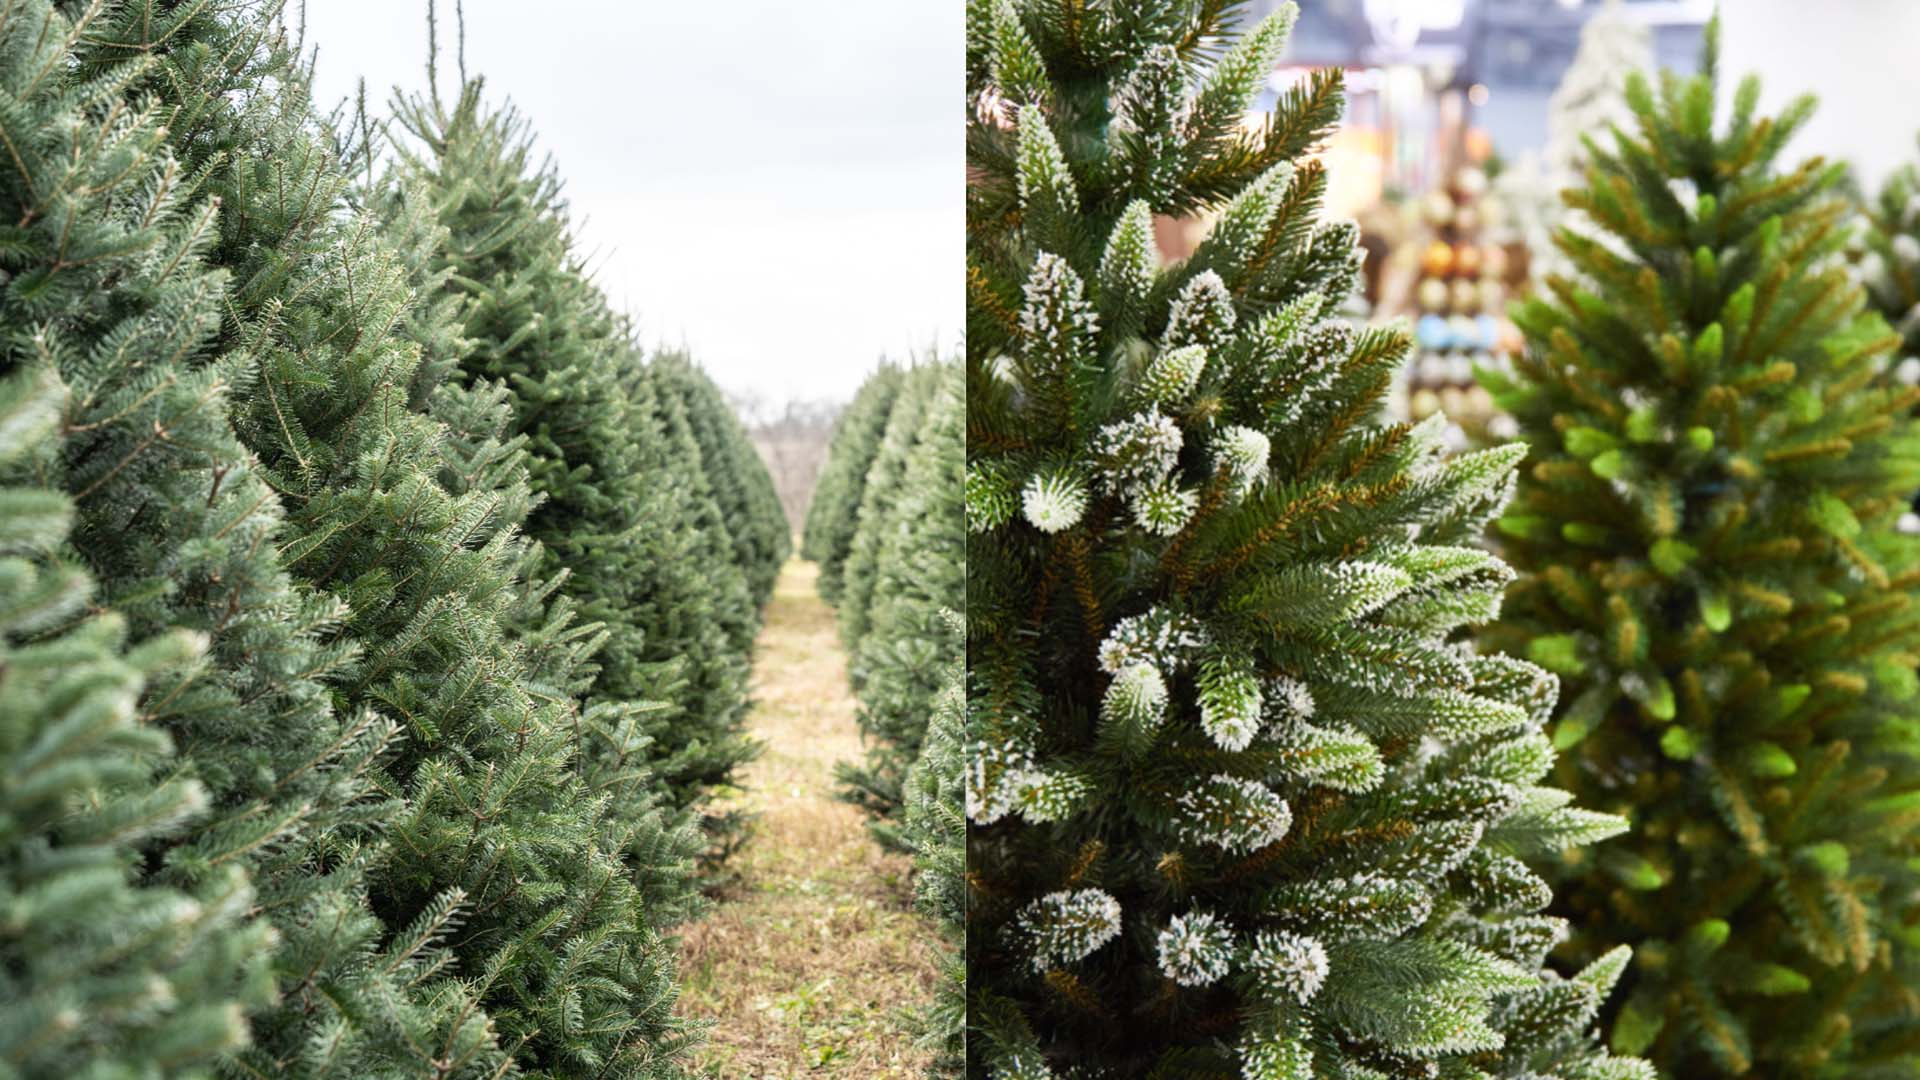 Are real or artificial trees better for the environment?